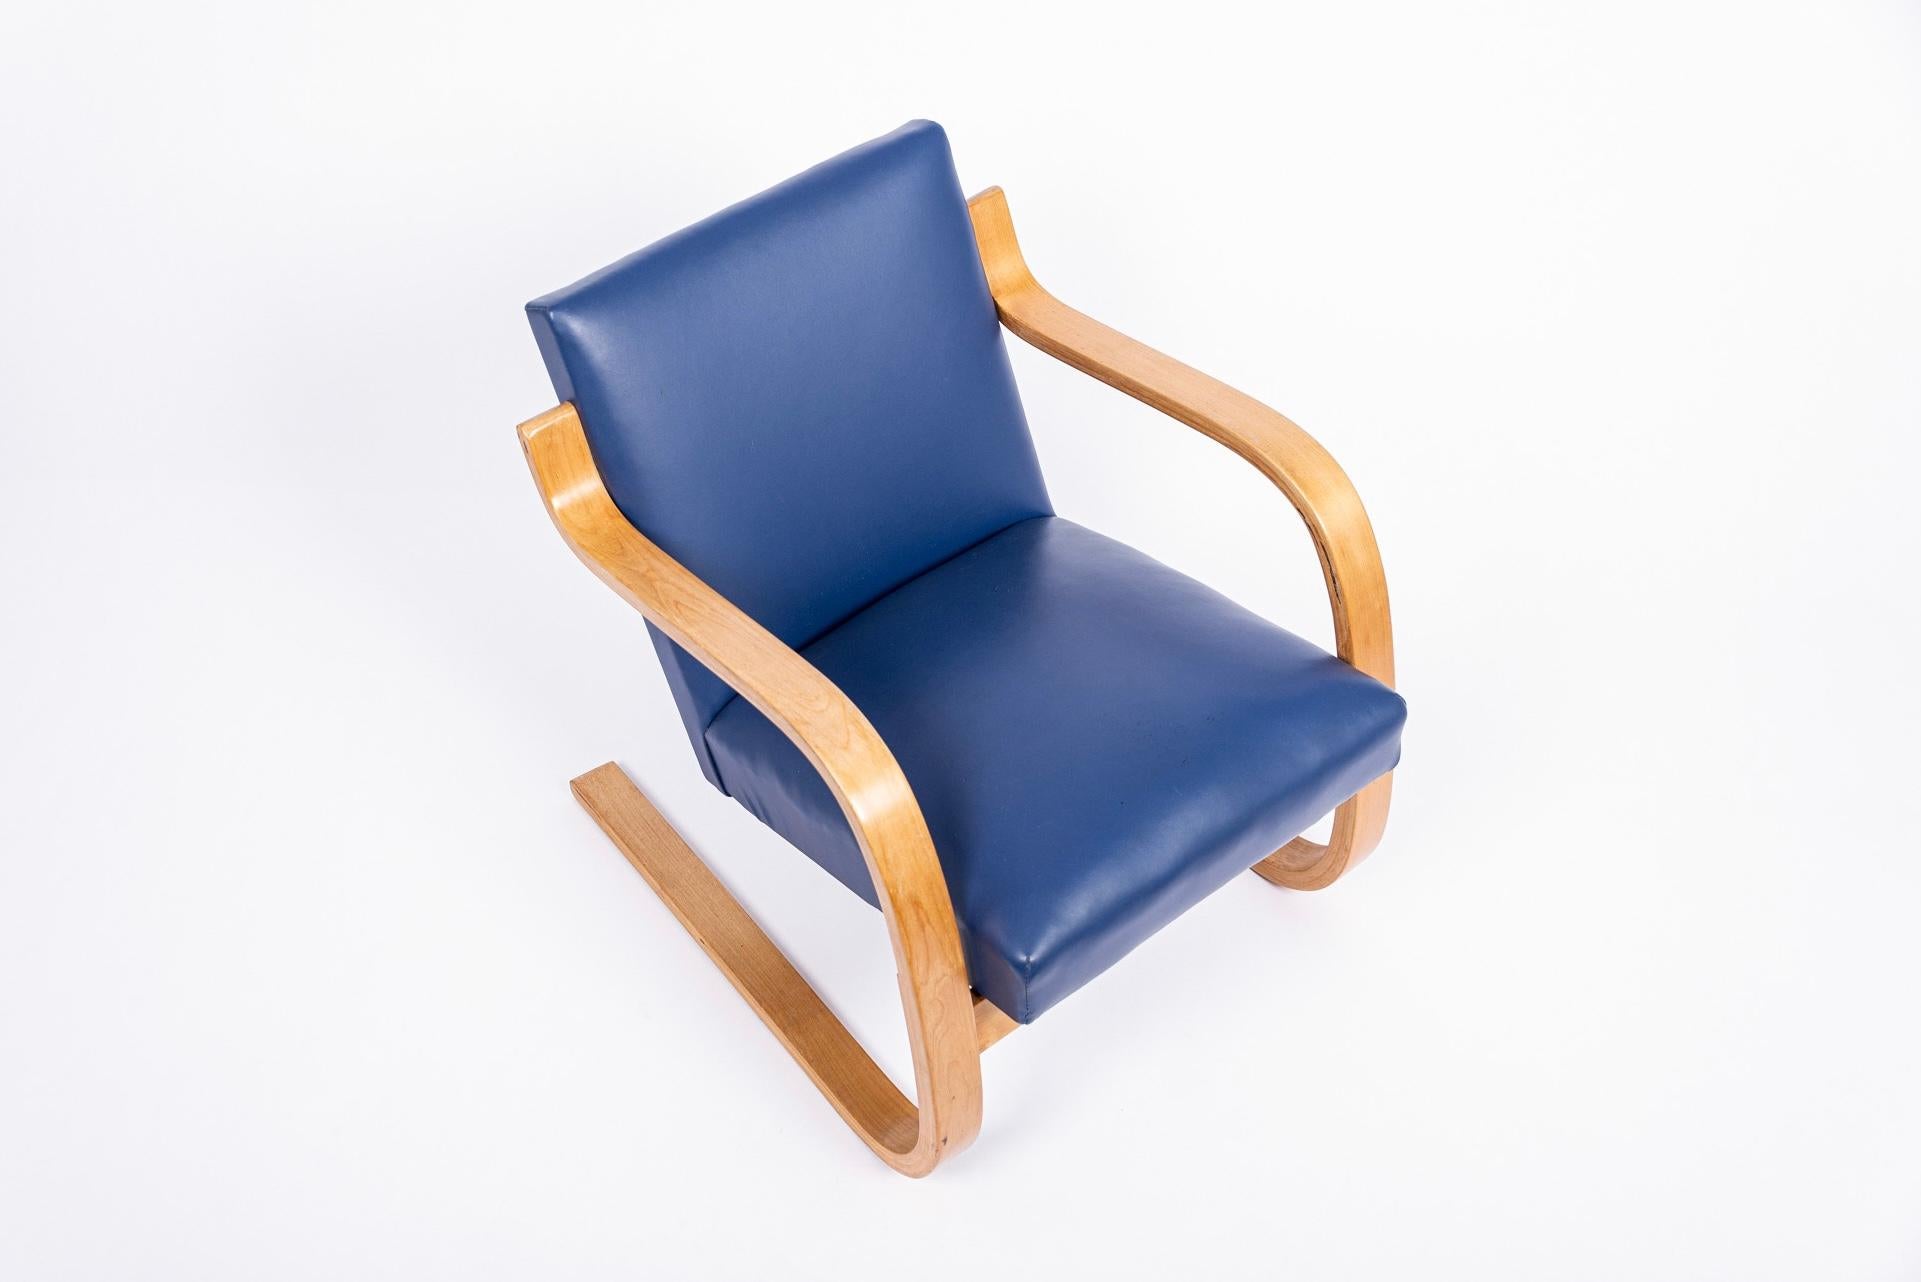 Fabric Early Model 402 Armchair by Alvar Aalto for Artek, Made in Finland, 1930s For Sale